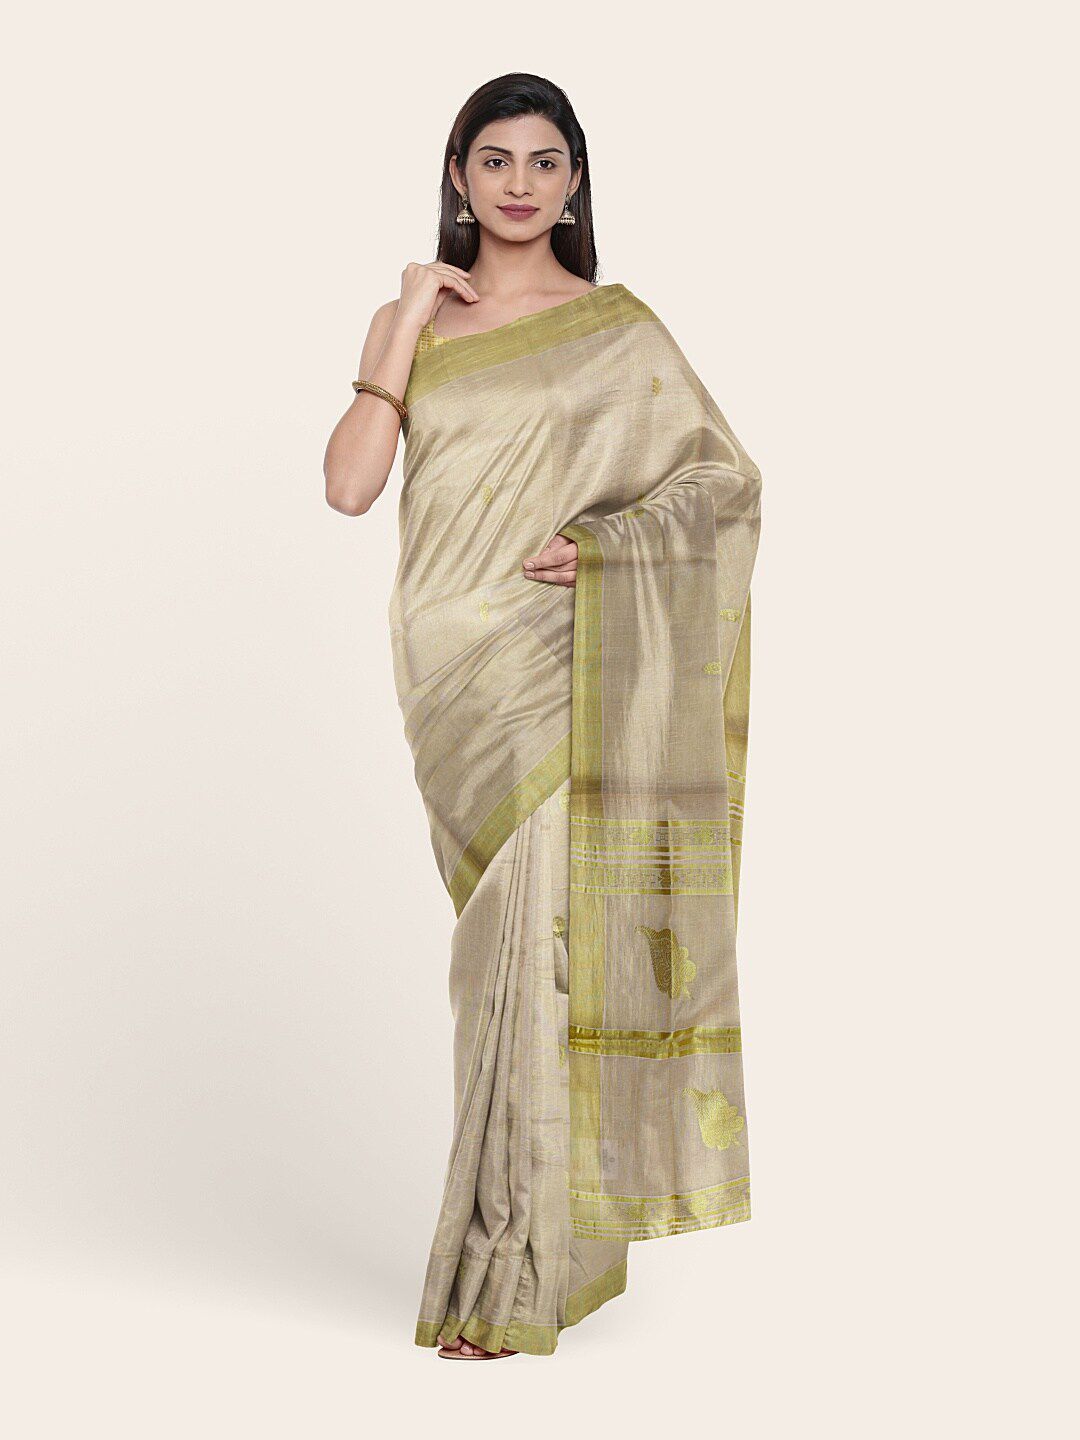 Pothys Gold-Toned Woven Design Pure Cotton Saree Price in India